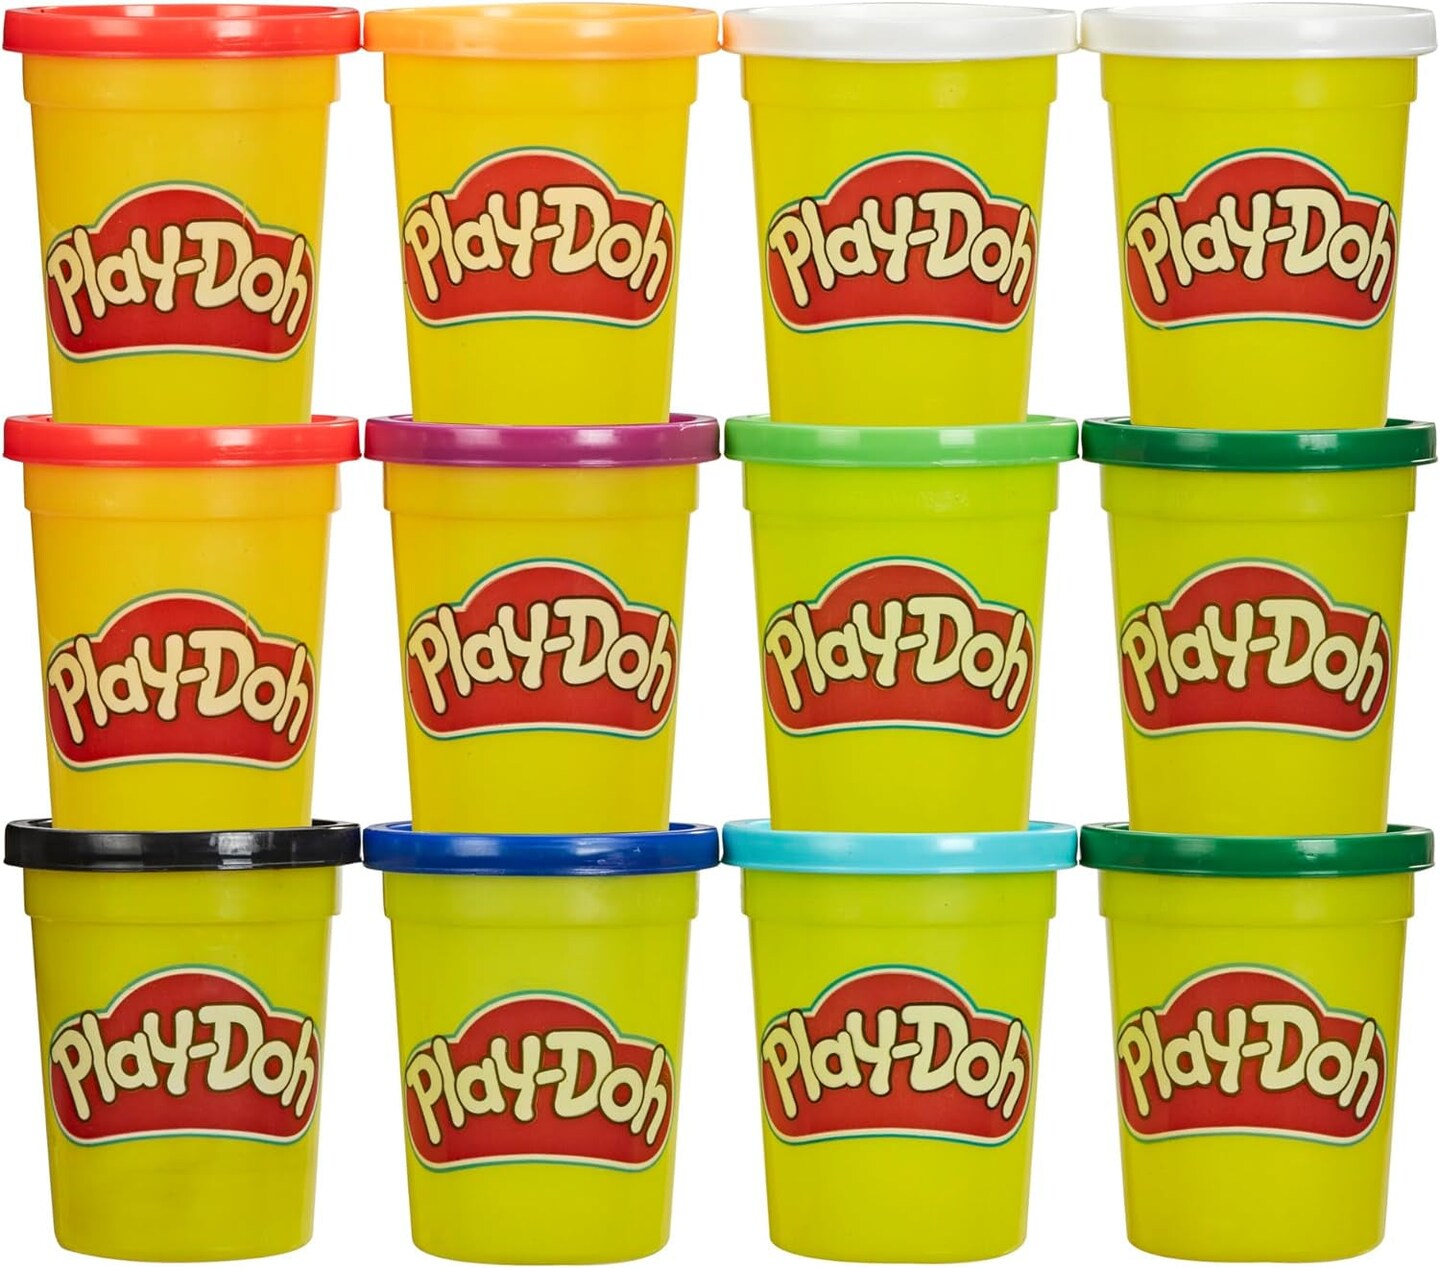 Play-Doh Bulk 12-Pack of Yellow Non-Toxic Modeling Compound, 4-Ounce Cans 